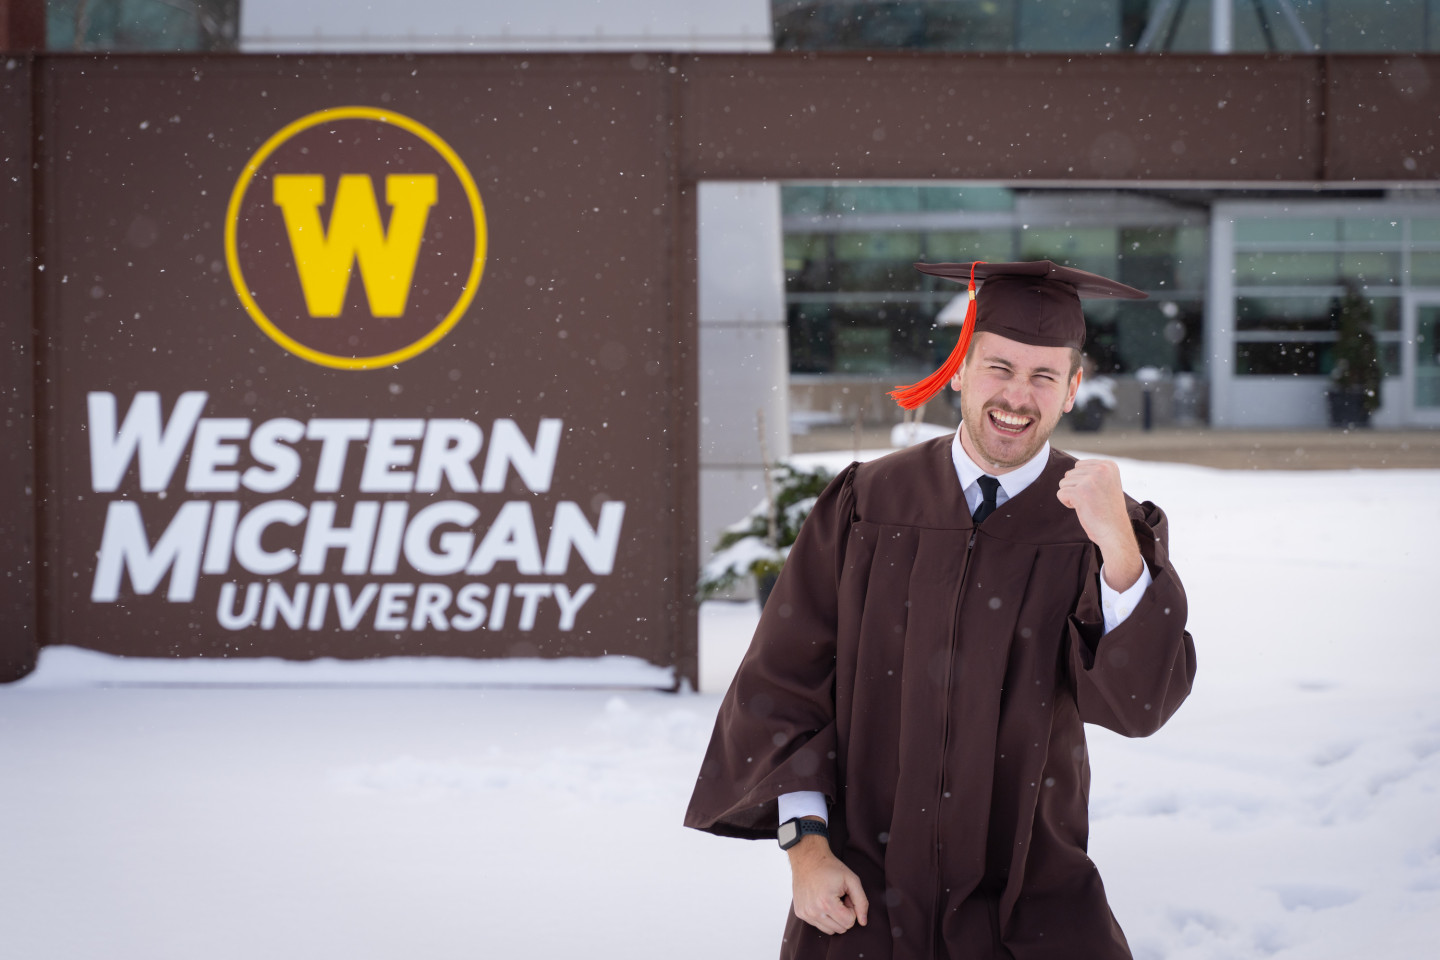 Joh Goheen raises a fist in celebration while standing outside in his graduation regalia as the snow falls.